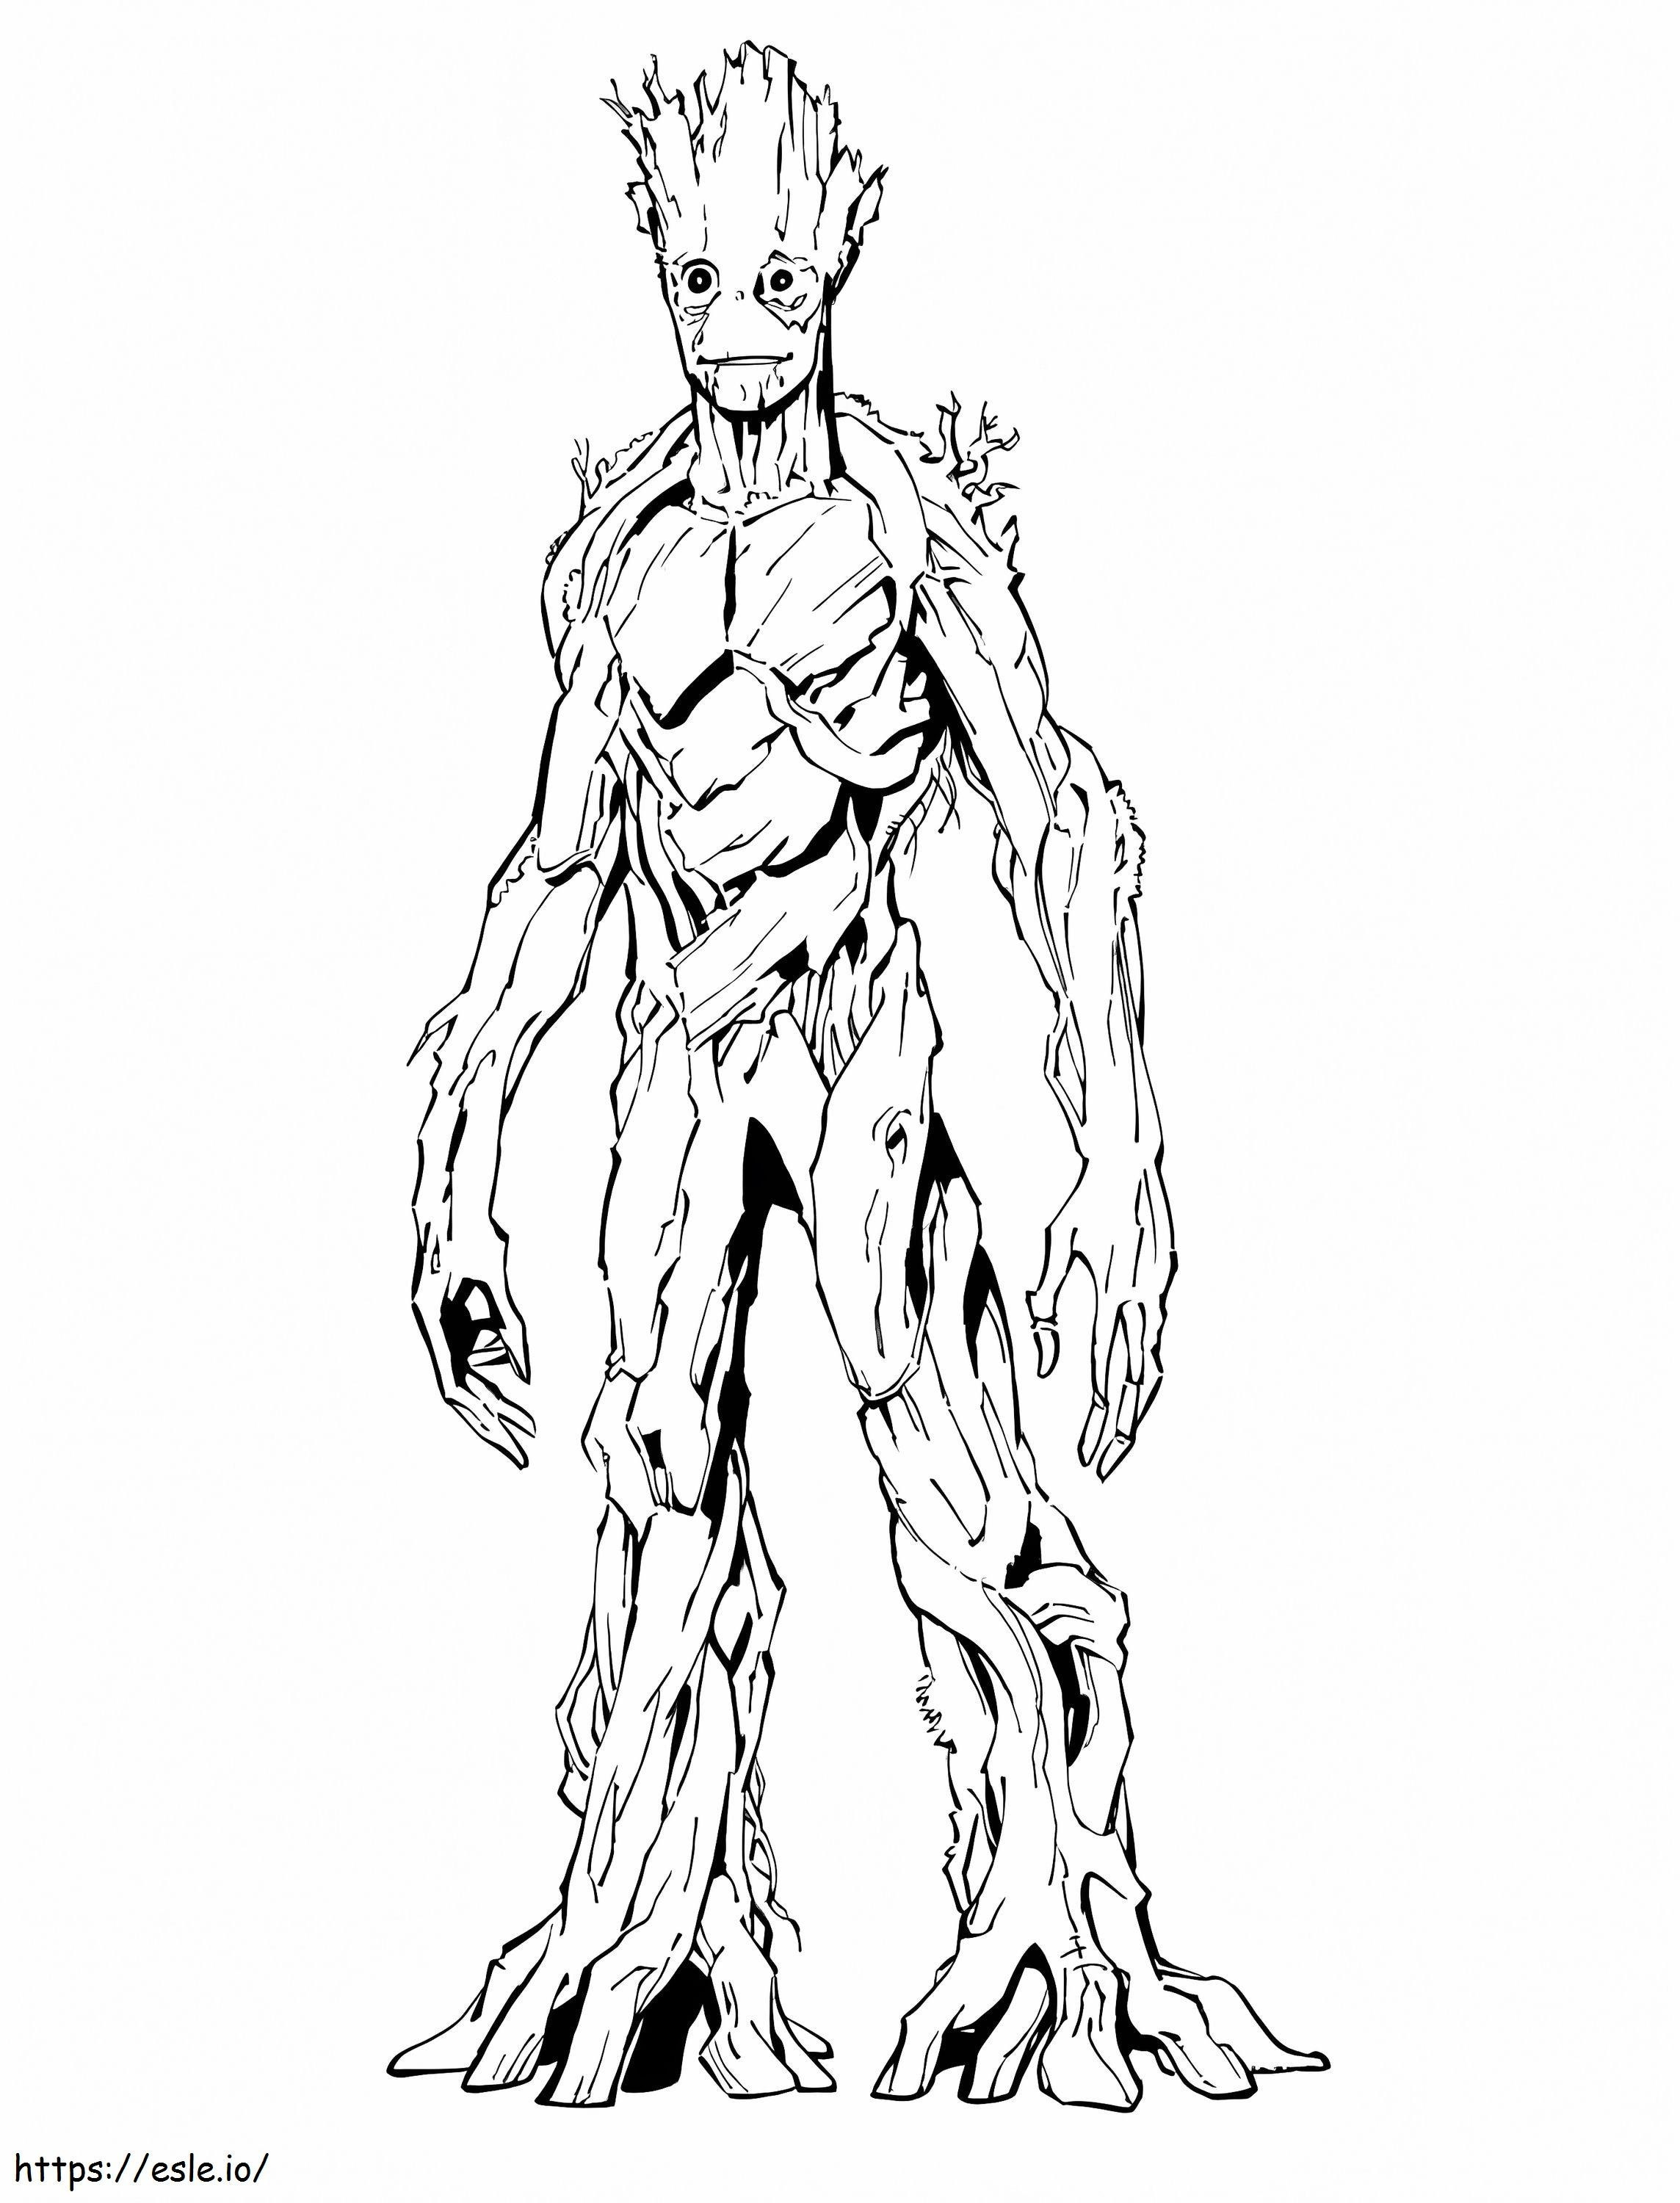 Viejo Groot coloring page